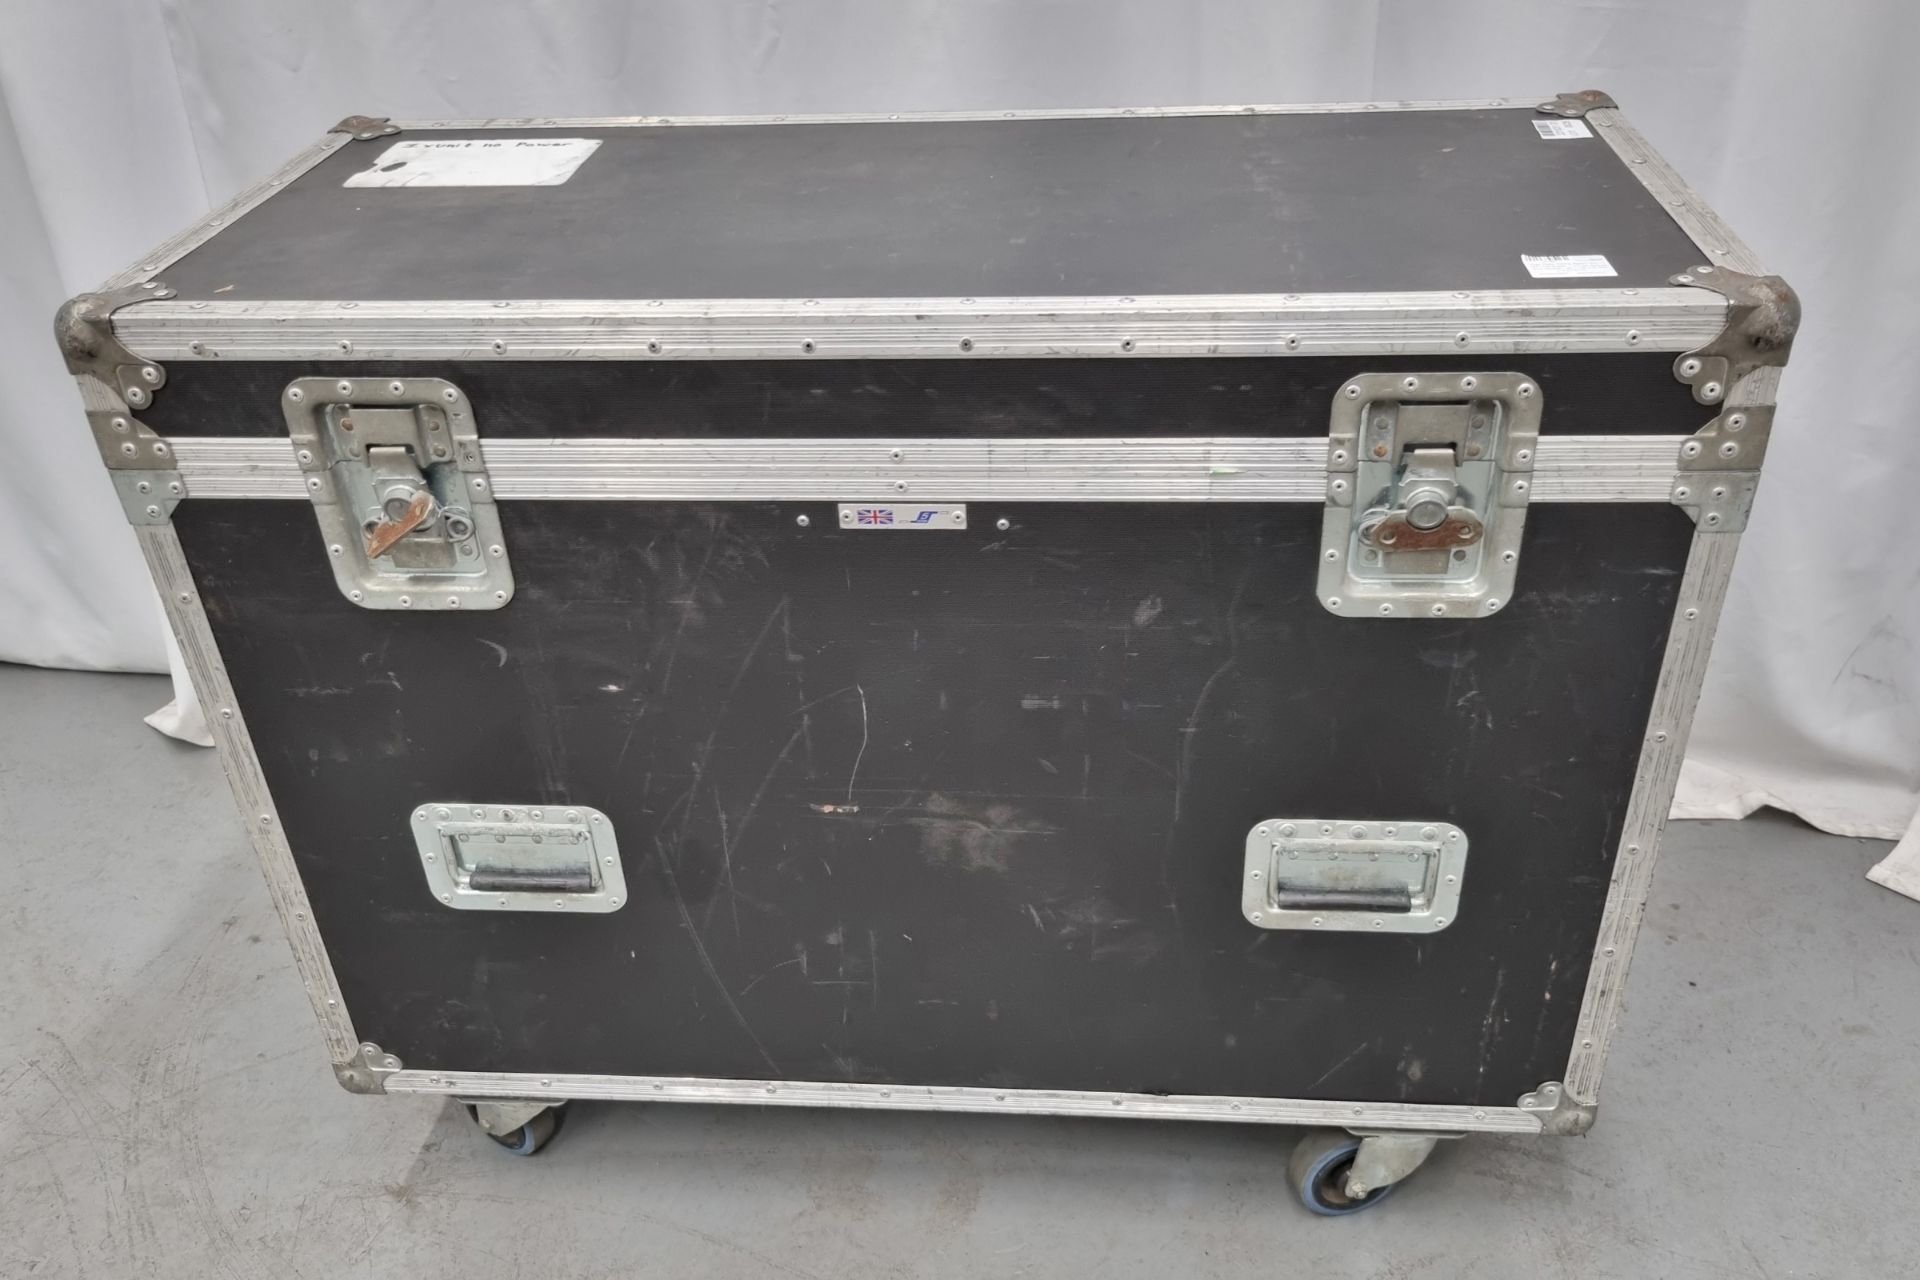 Clay Paky Alpha Beam 300 in twin flight case - unit as spares and repairs - W 1100 x D 490 x H 870mm - Bild 9 aus 9